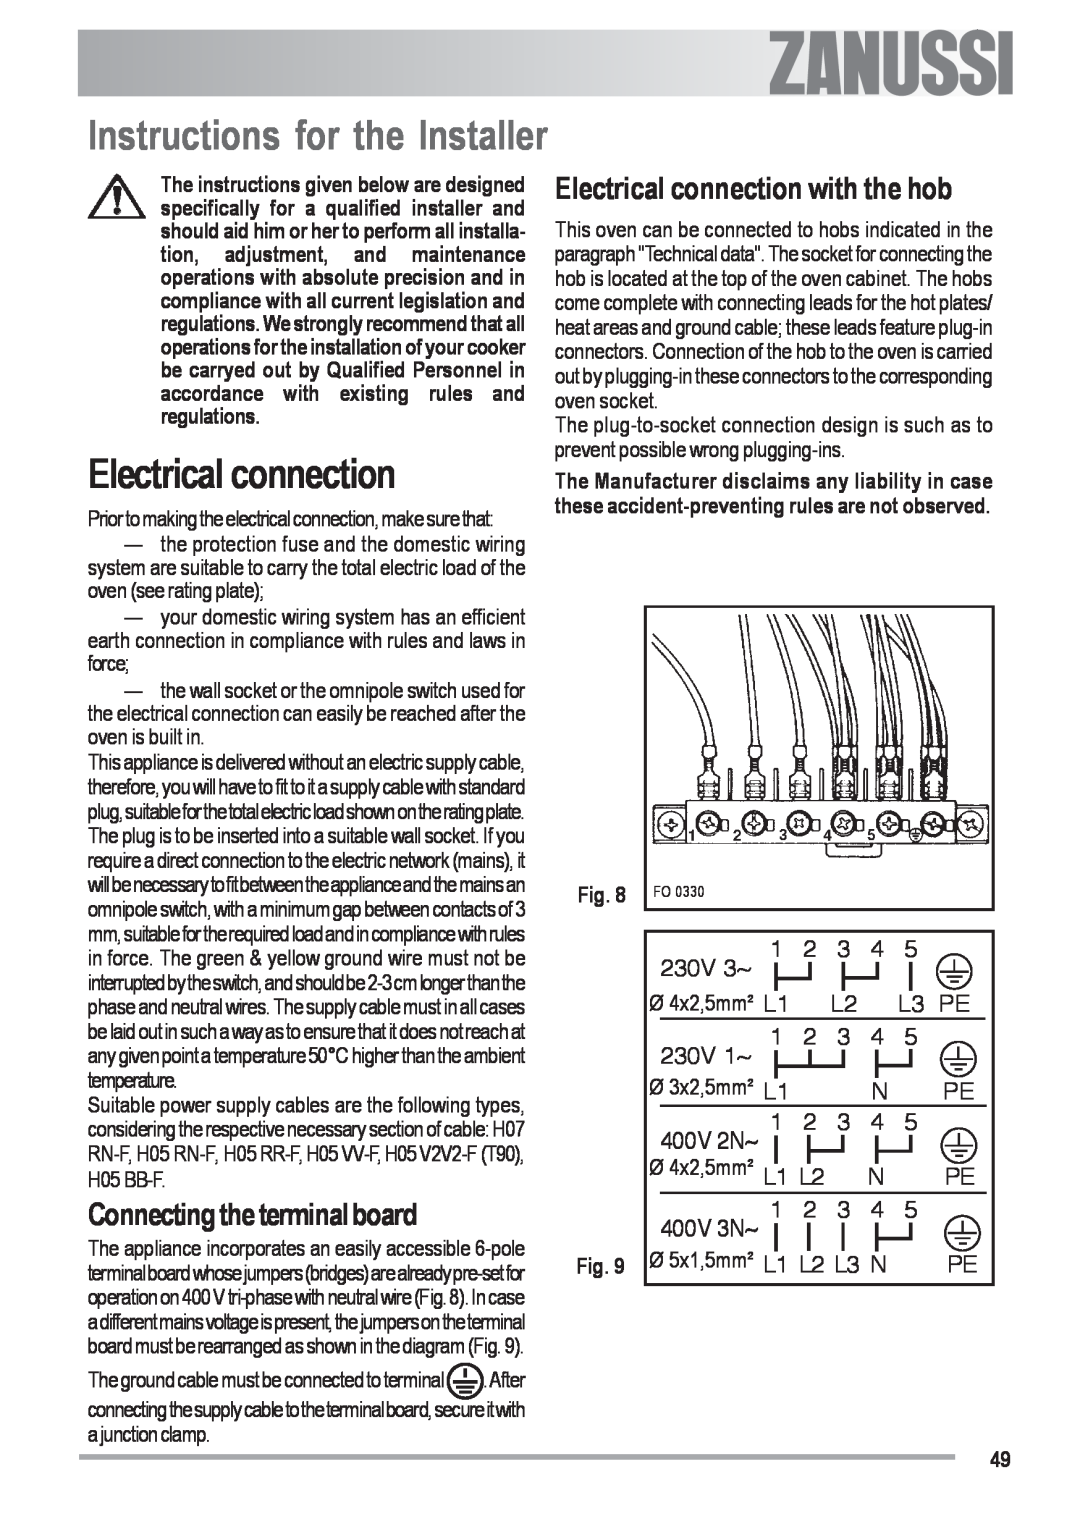 Zanussi ZOU 482 Instructions for the Installer, Connecting the terminal board, Electrical connection with the hob, 230V 3~ 